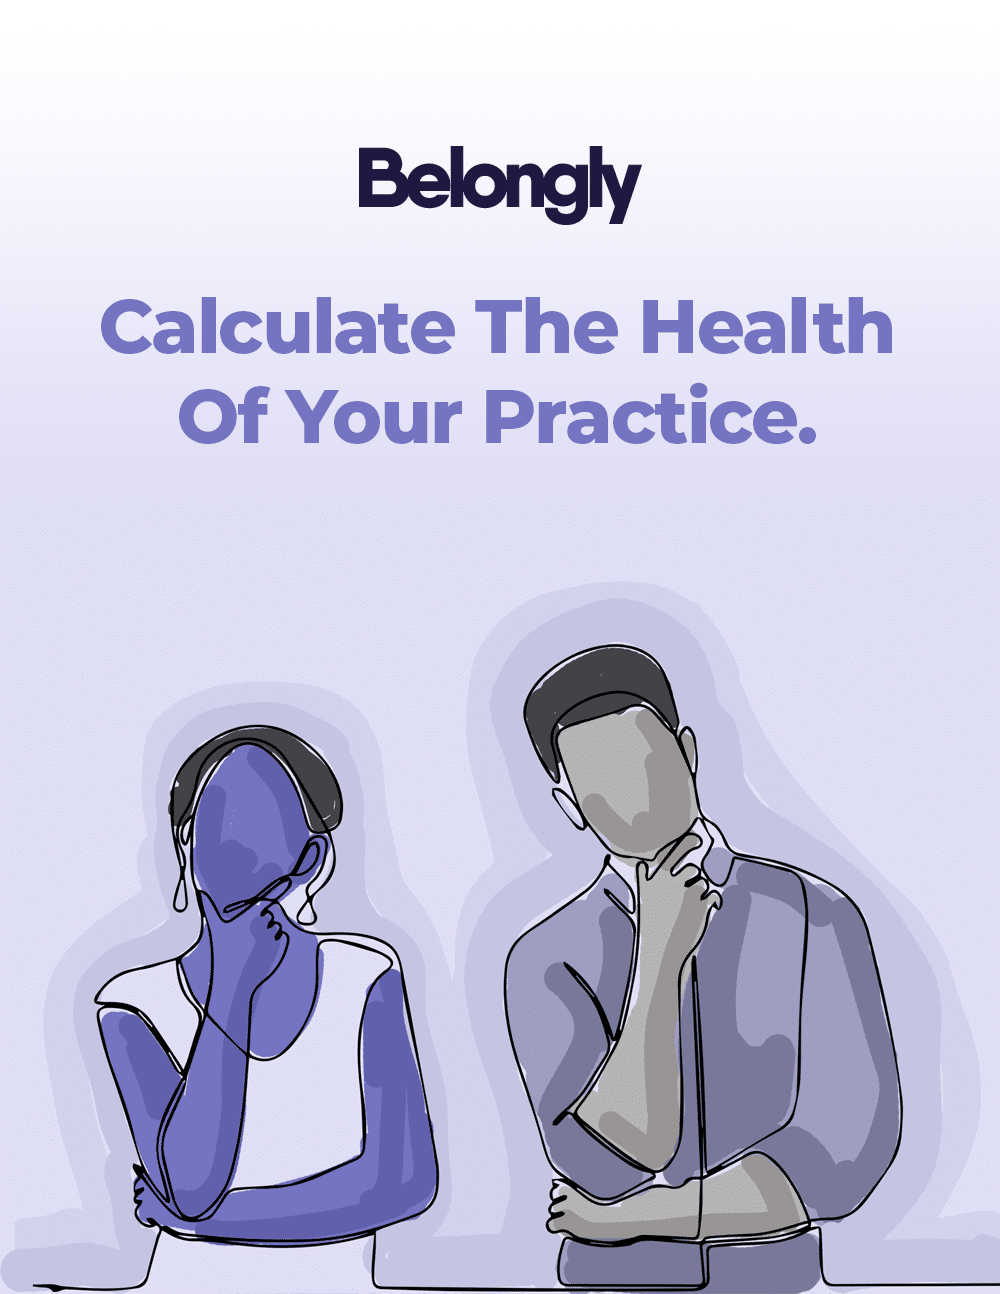 Calculate The Health Of Your Practice.